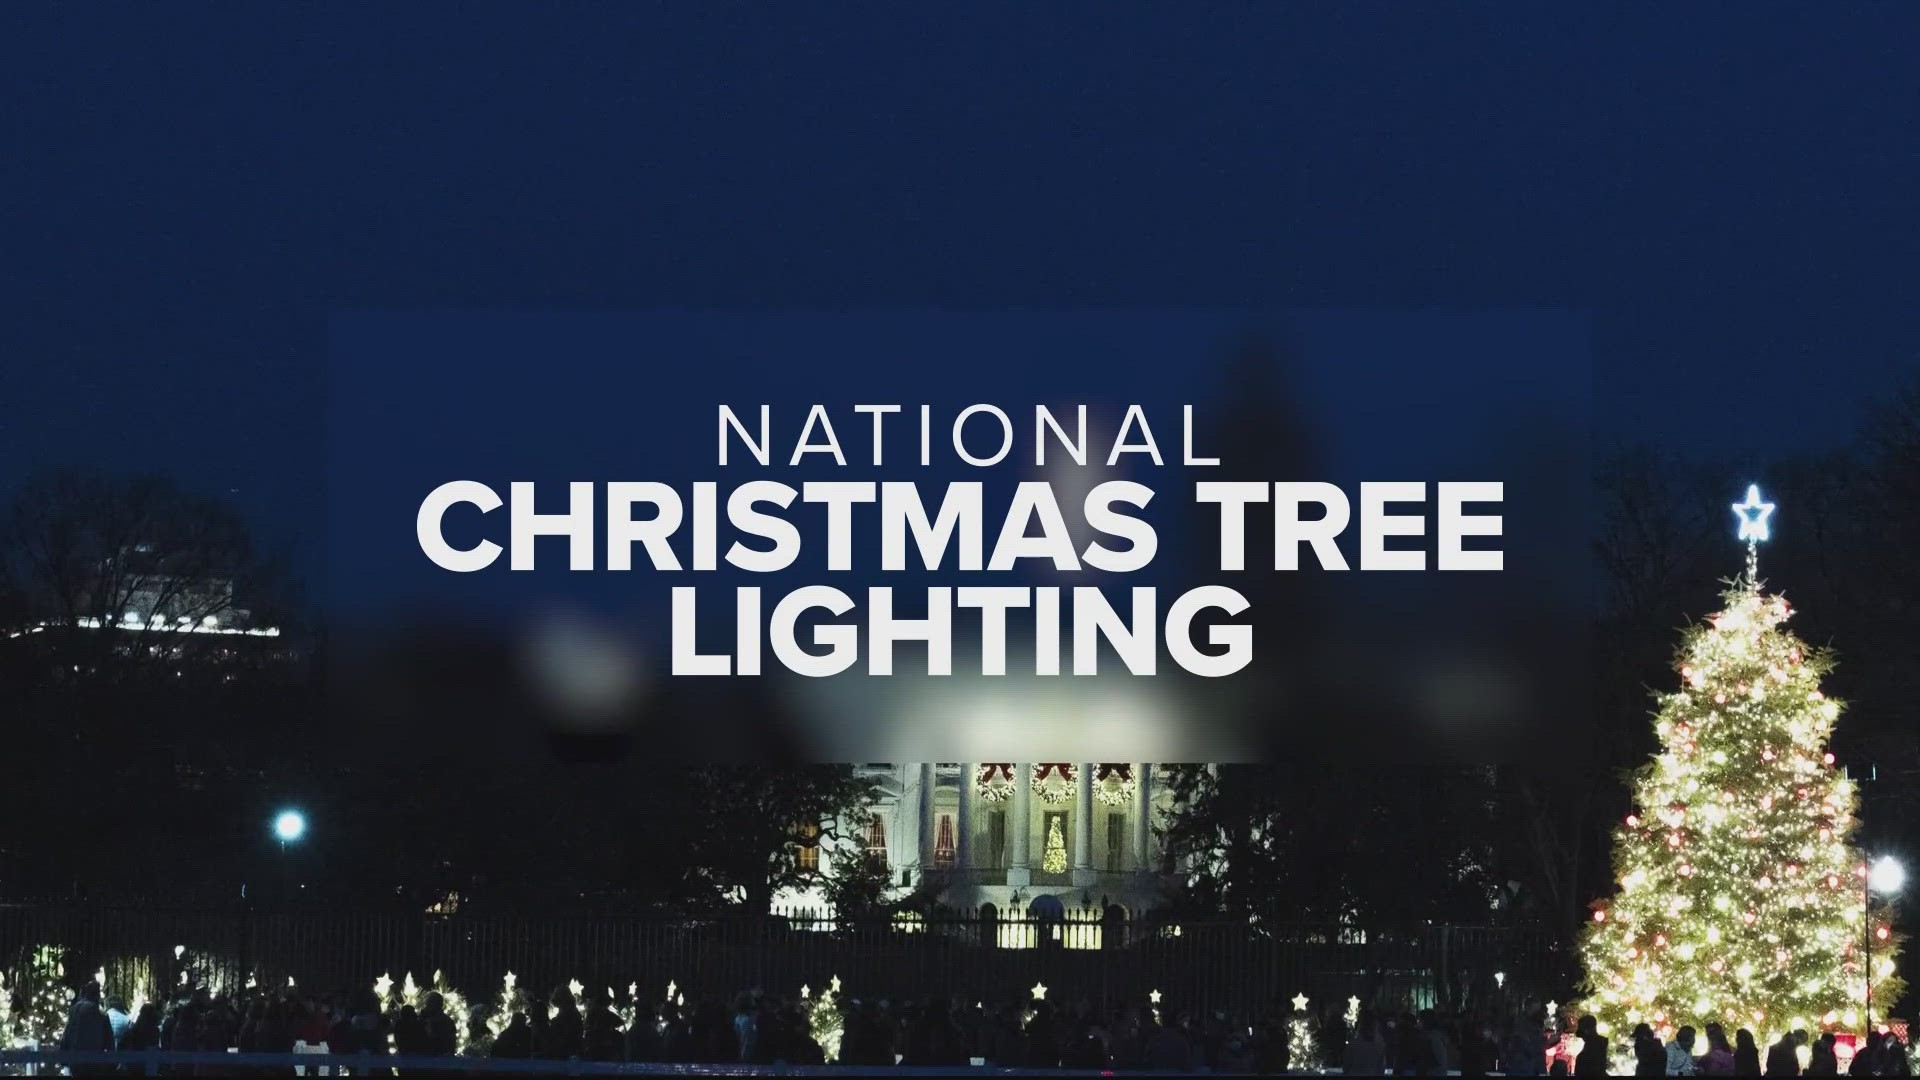 The magic of the holidays comes to the White House Ellipse for the 101st lighting of the National Christmas Tree.